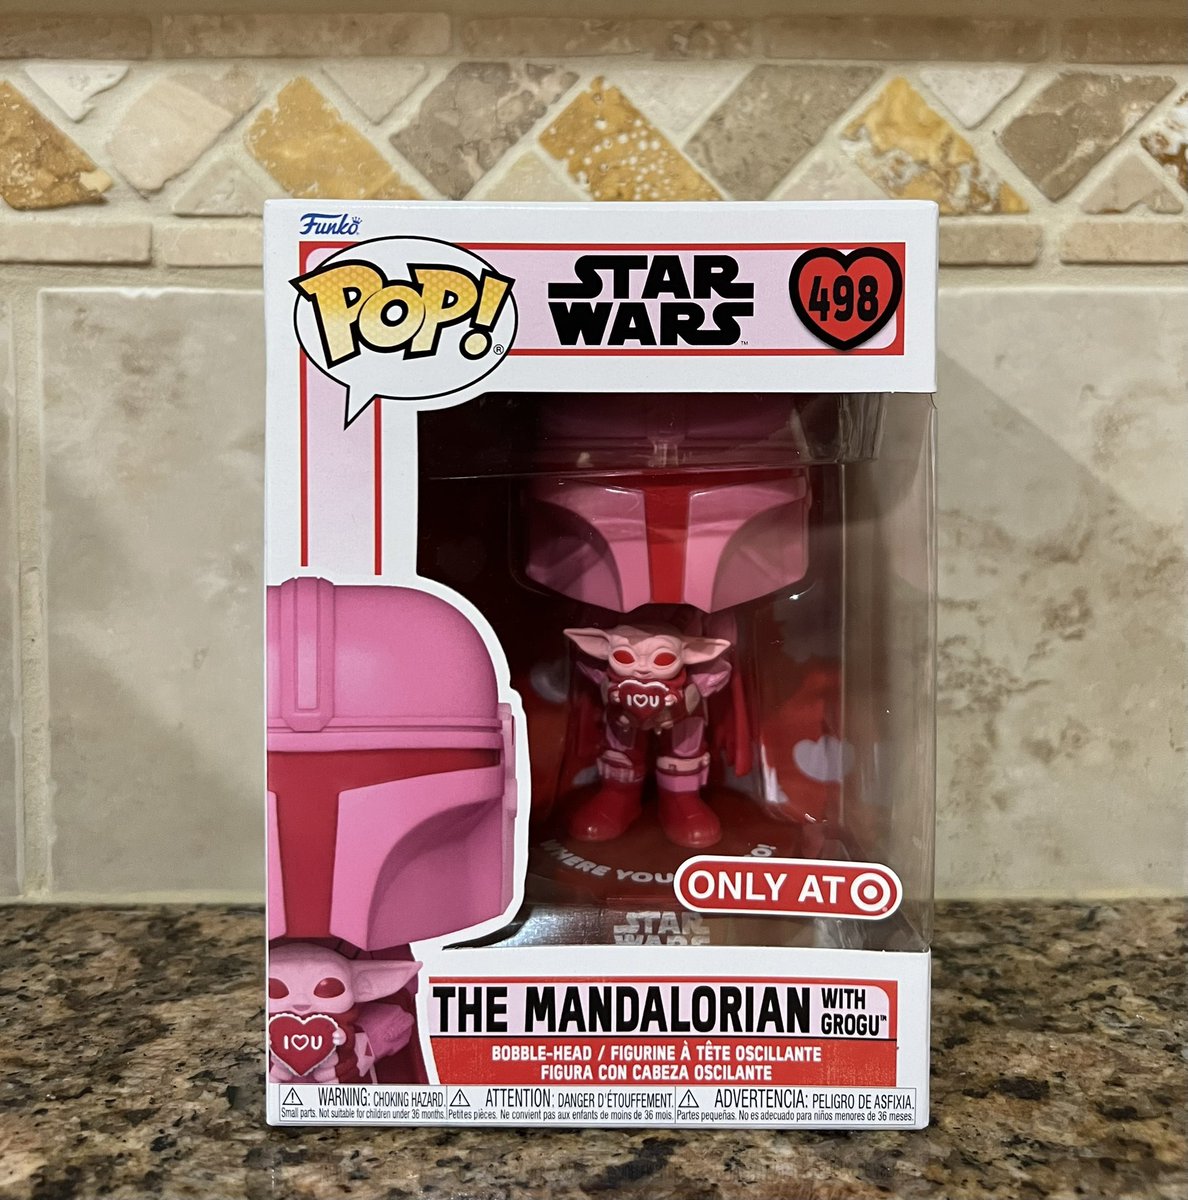 Target run and done - Picked up the Valentines Mandalorian with Grogu! . Hitting stores now. DPCI: 323-01-8651. TCIN: 82736129. . #TheMandalorian #Grogu #BabyYoda #Valentines #Collectibles #Funko #DisTrackers